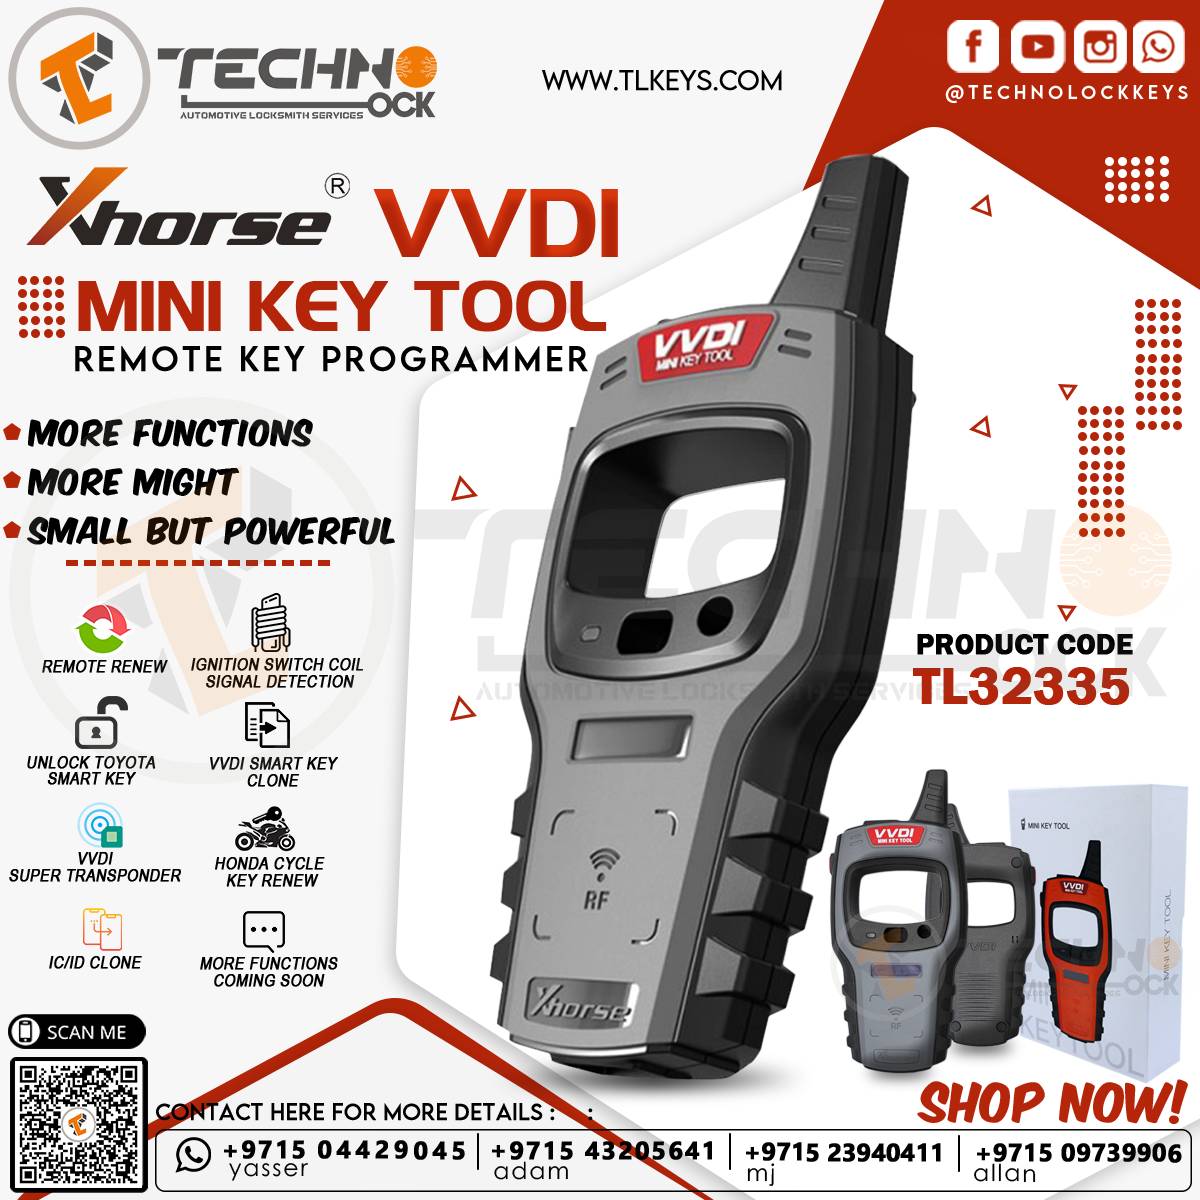  VVDI Mini Key Tool enables you reading keys frequency fast and accurate